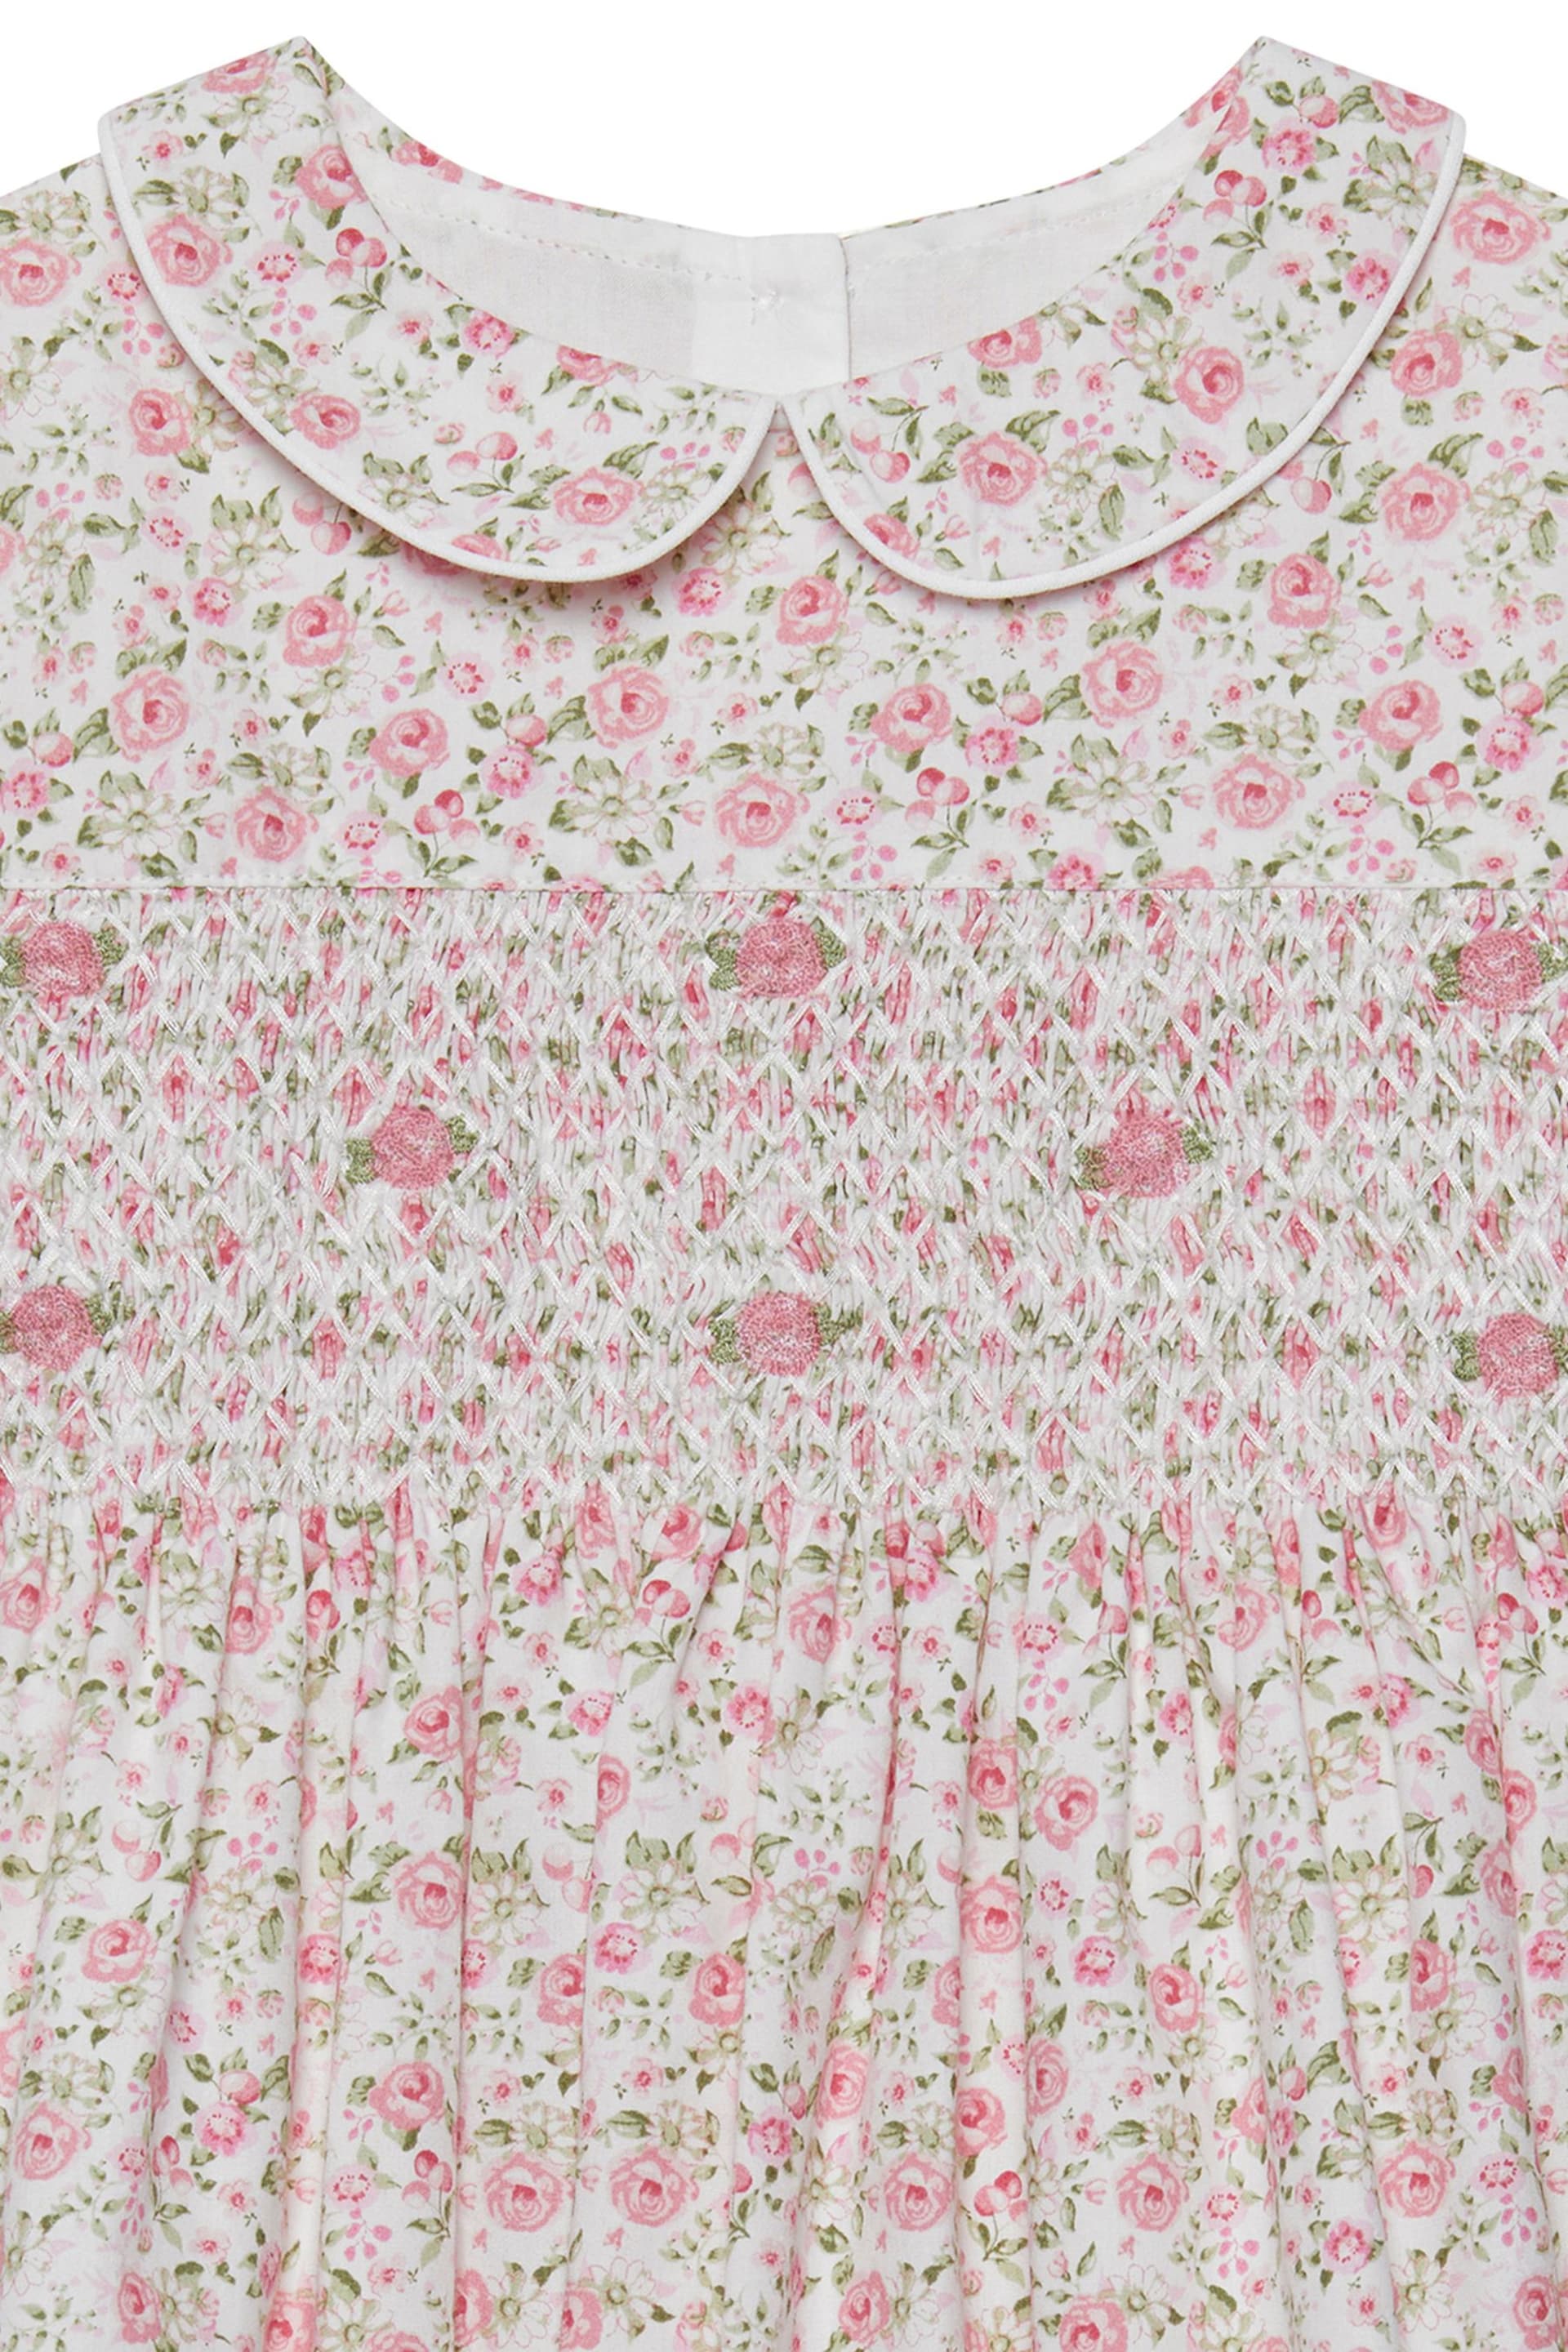 Trotters London Rose Catherine Rose Smocked Cotton Dress - Image 6 of 6